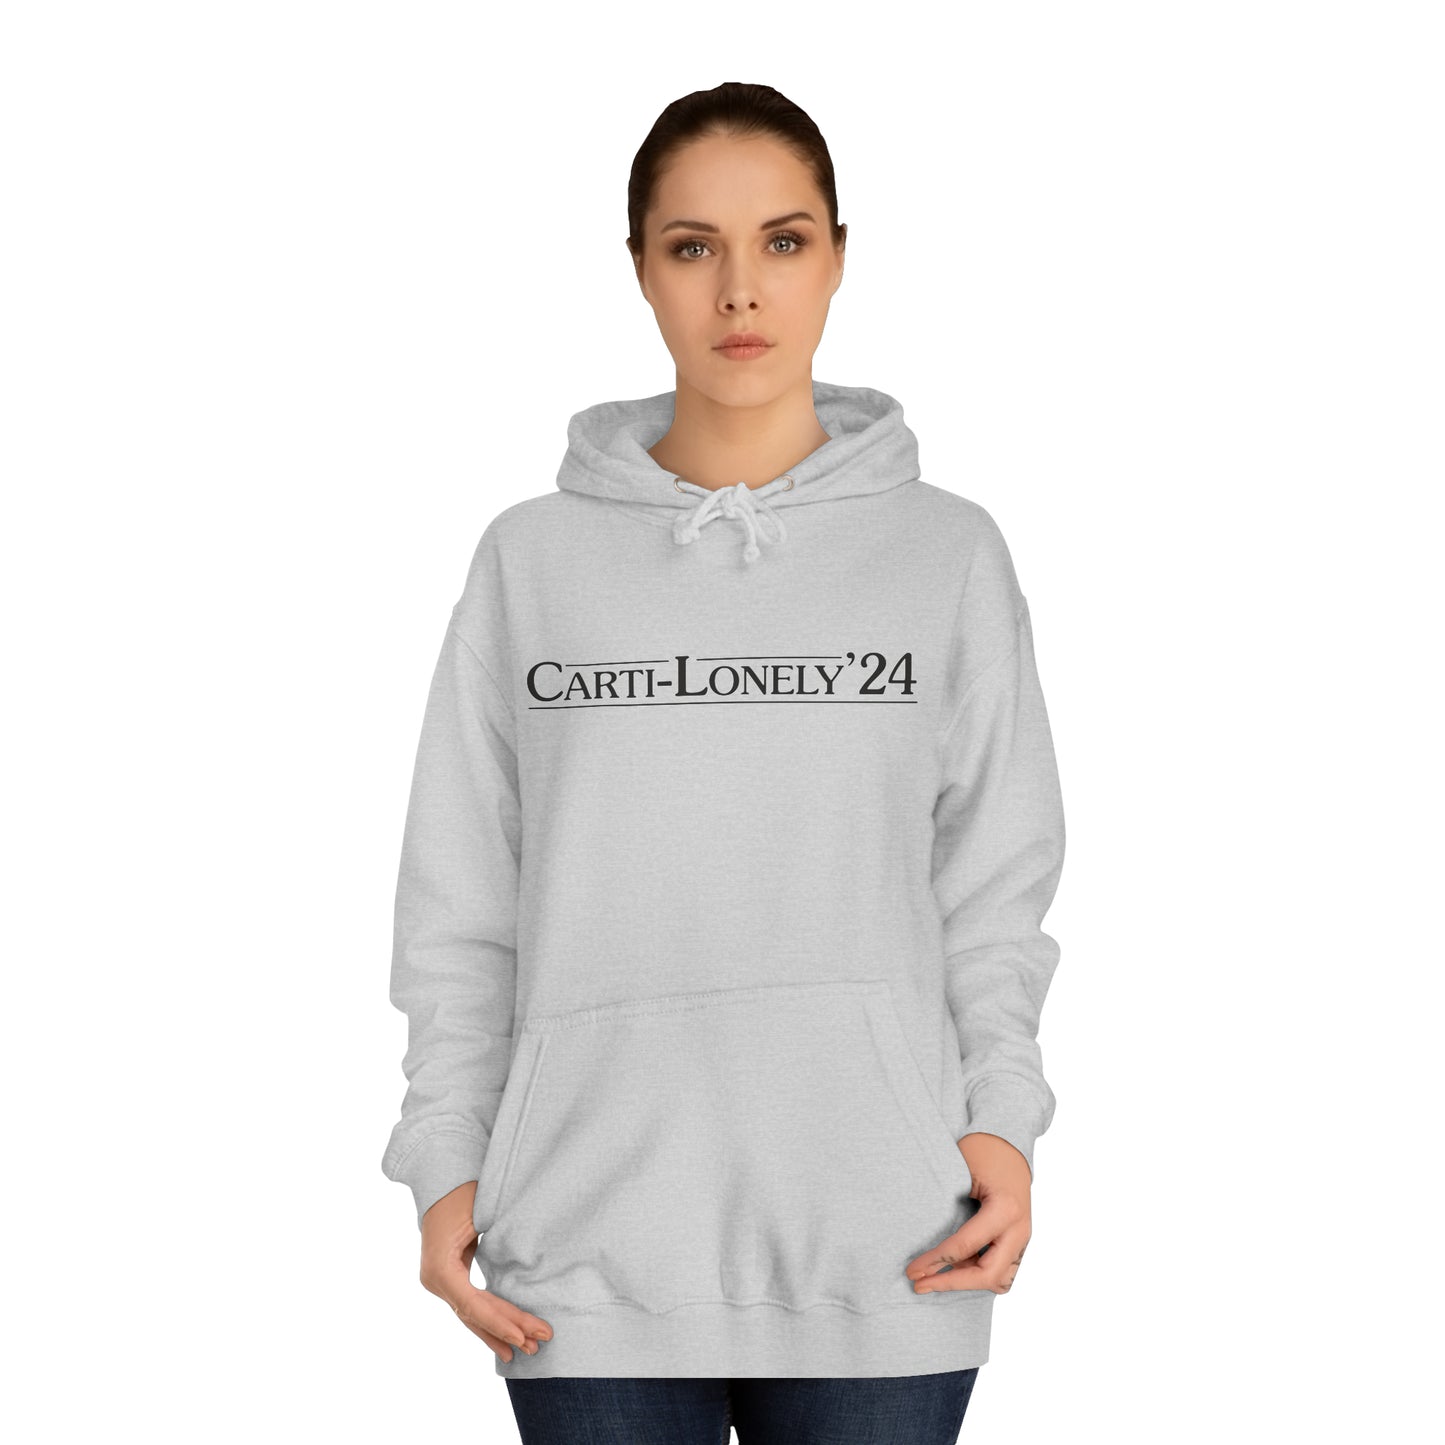 Carti-Lonely '24 Hoodie